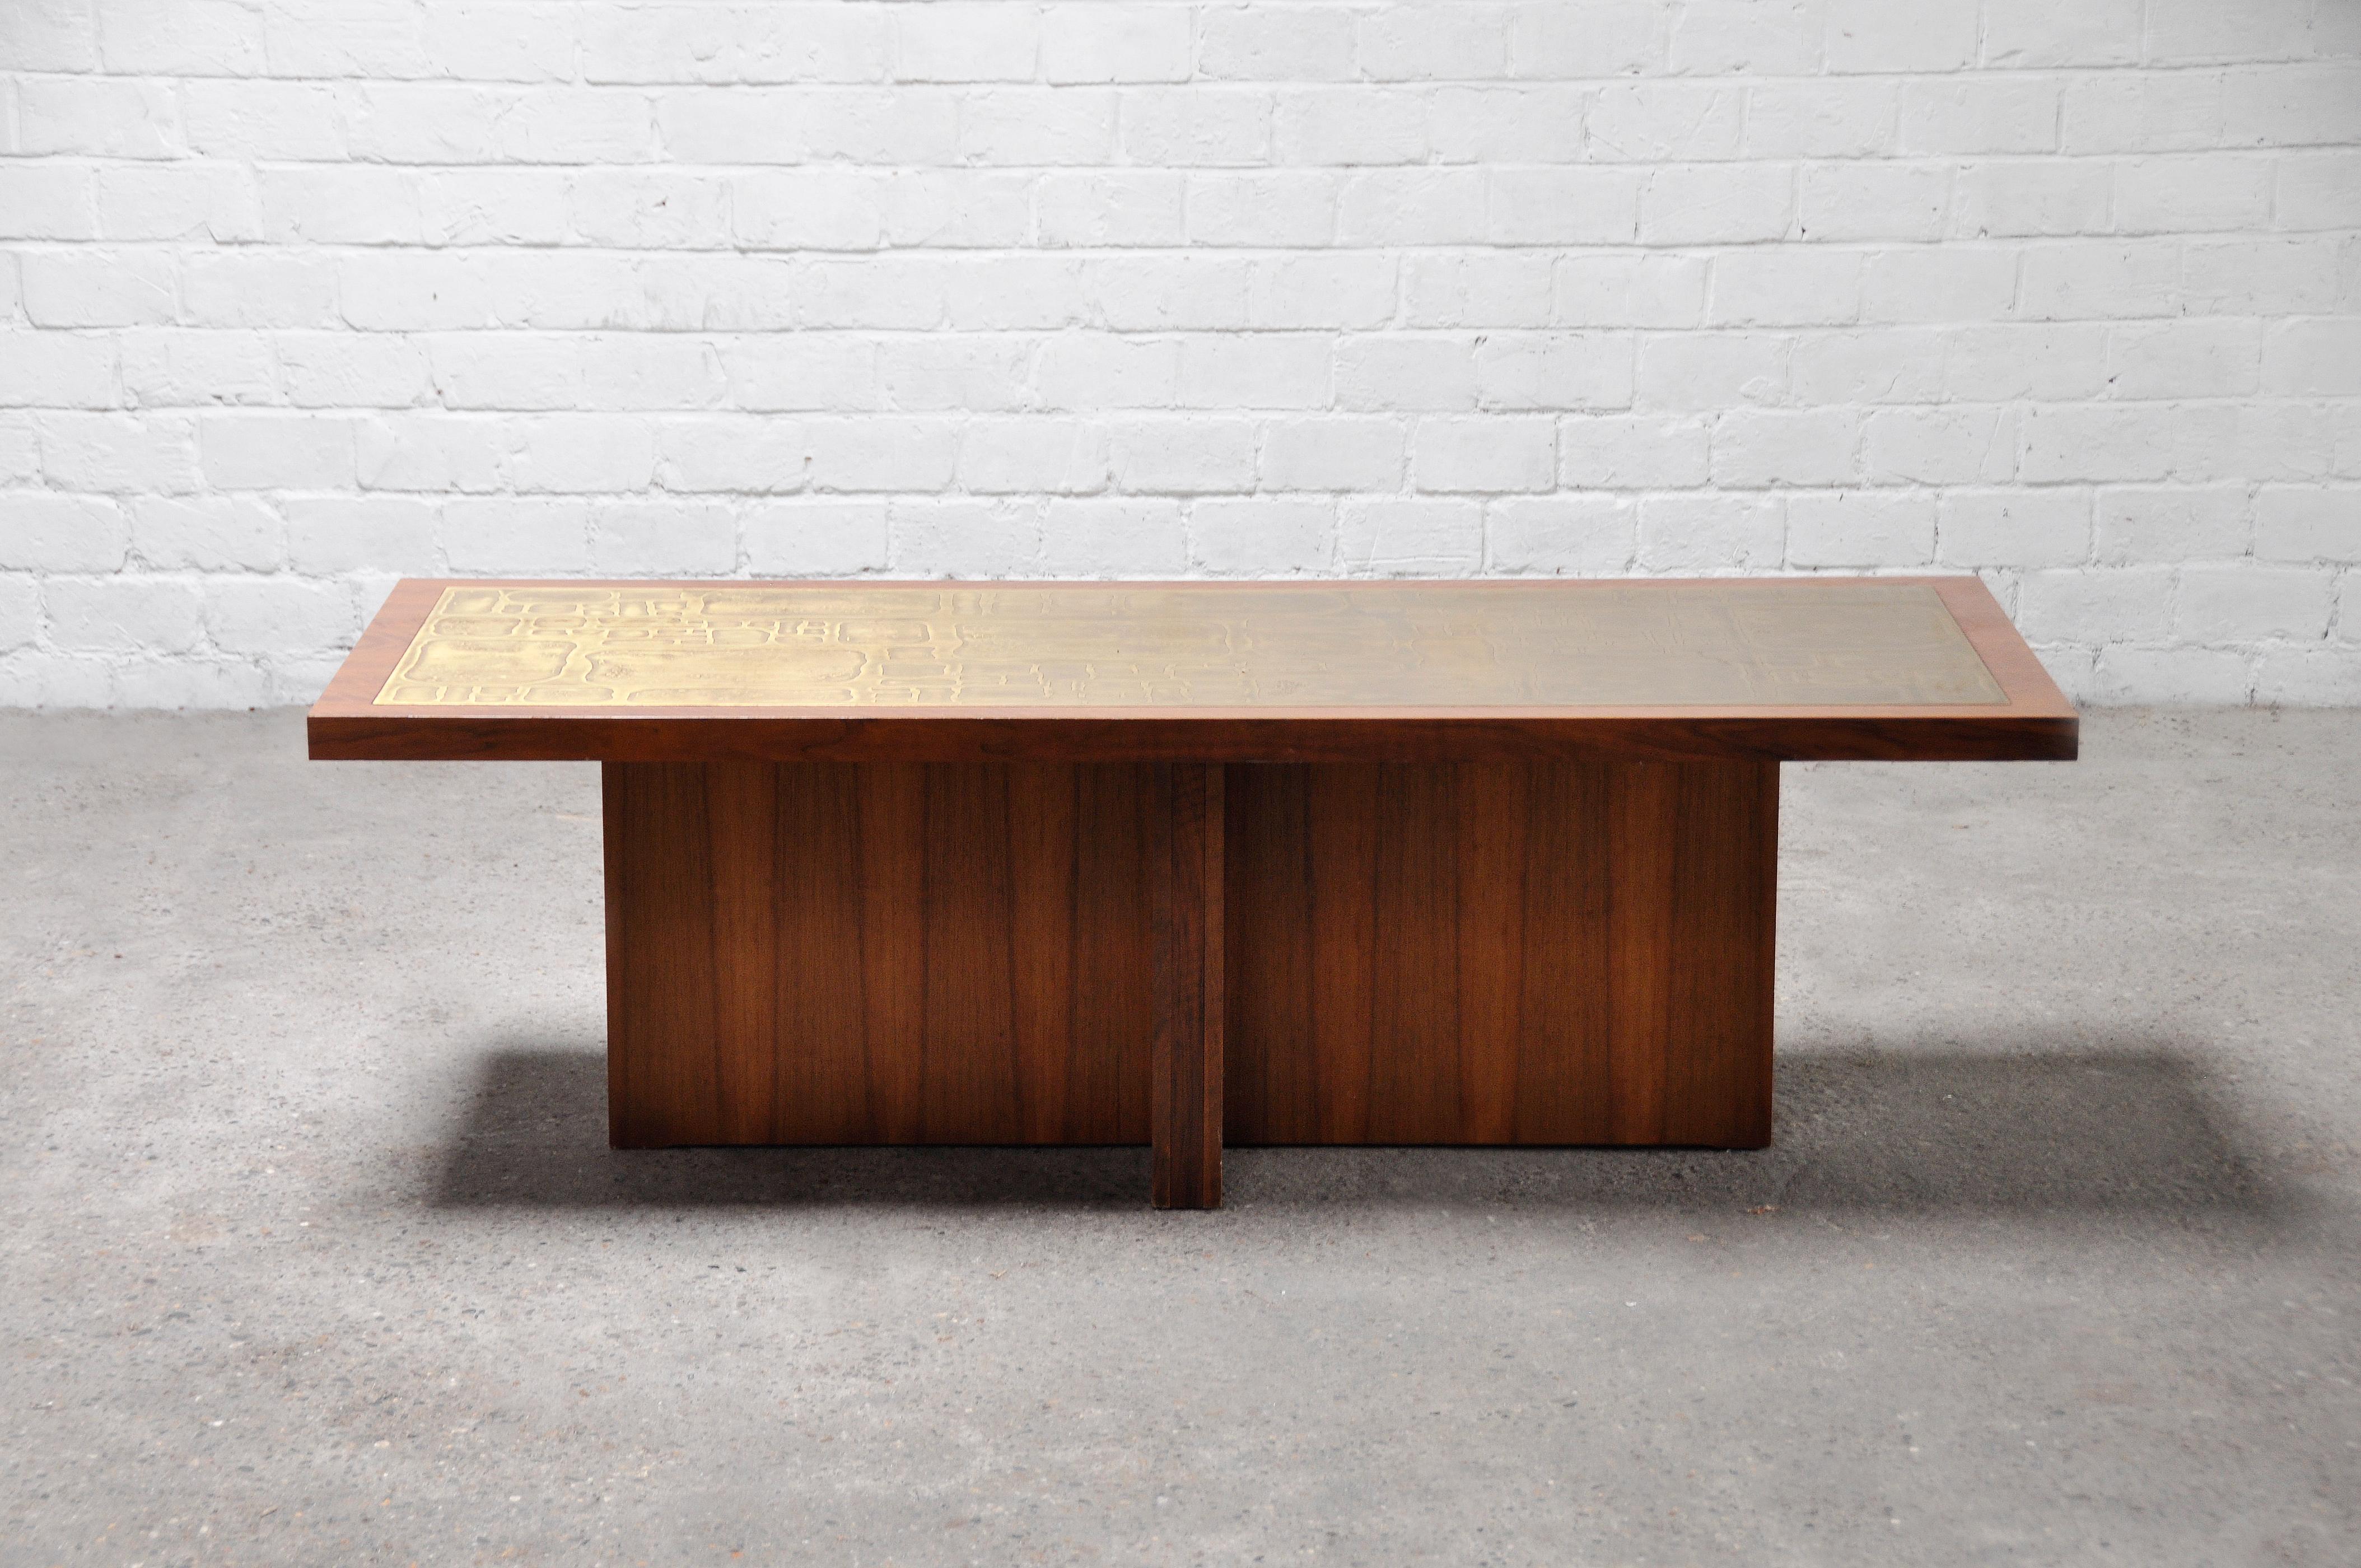 German Vintage Coffee Table With Modernist Brass Etched Inlay by Bernhard Rohne, 1960s For Sale